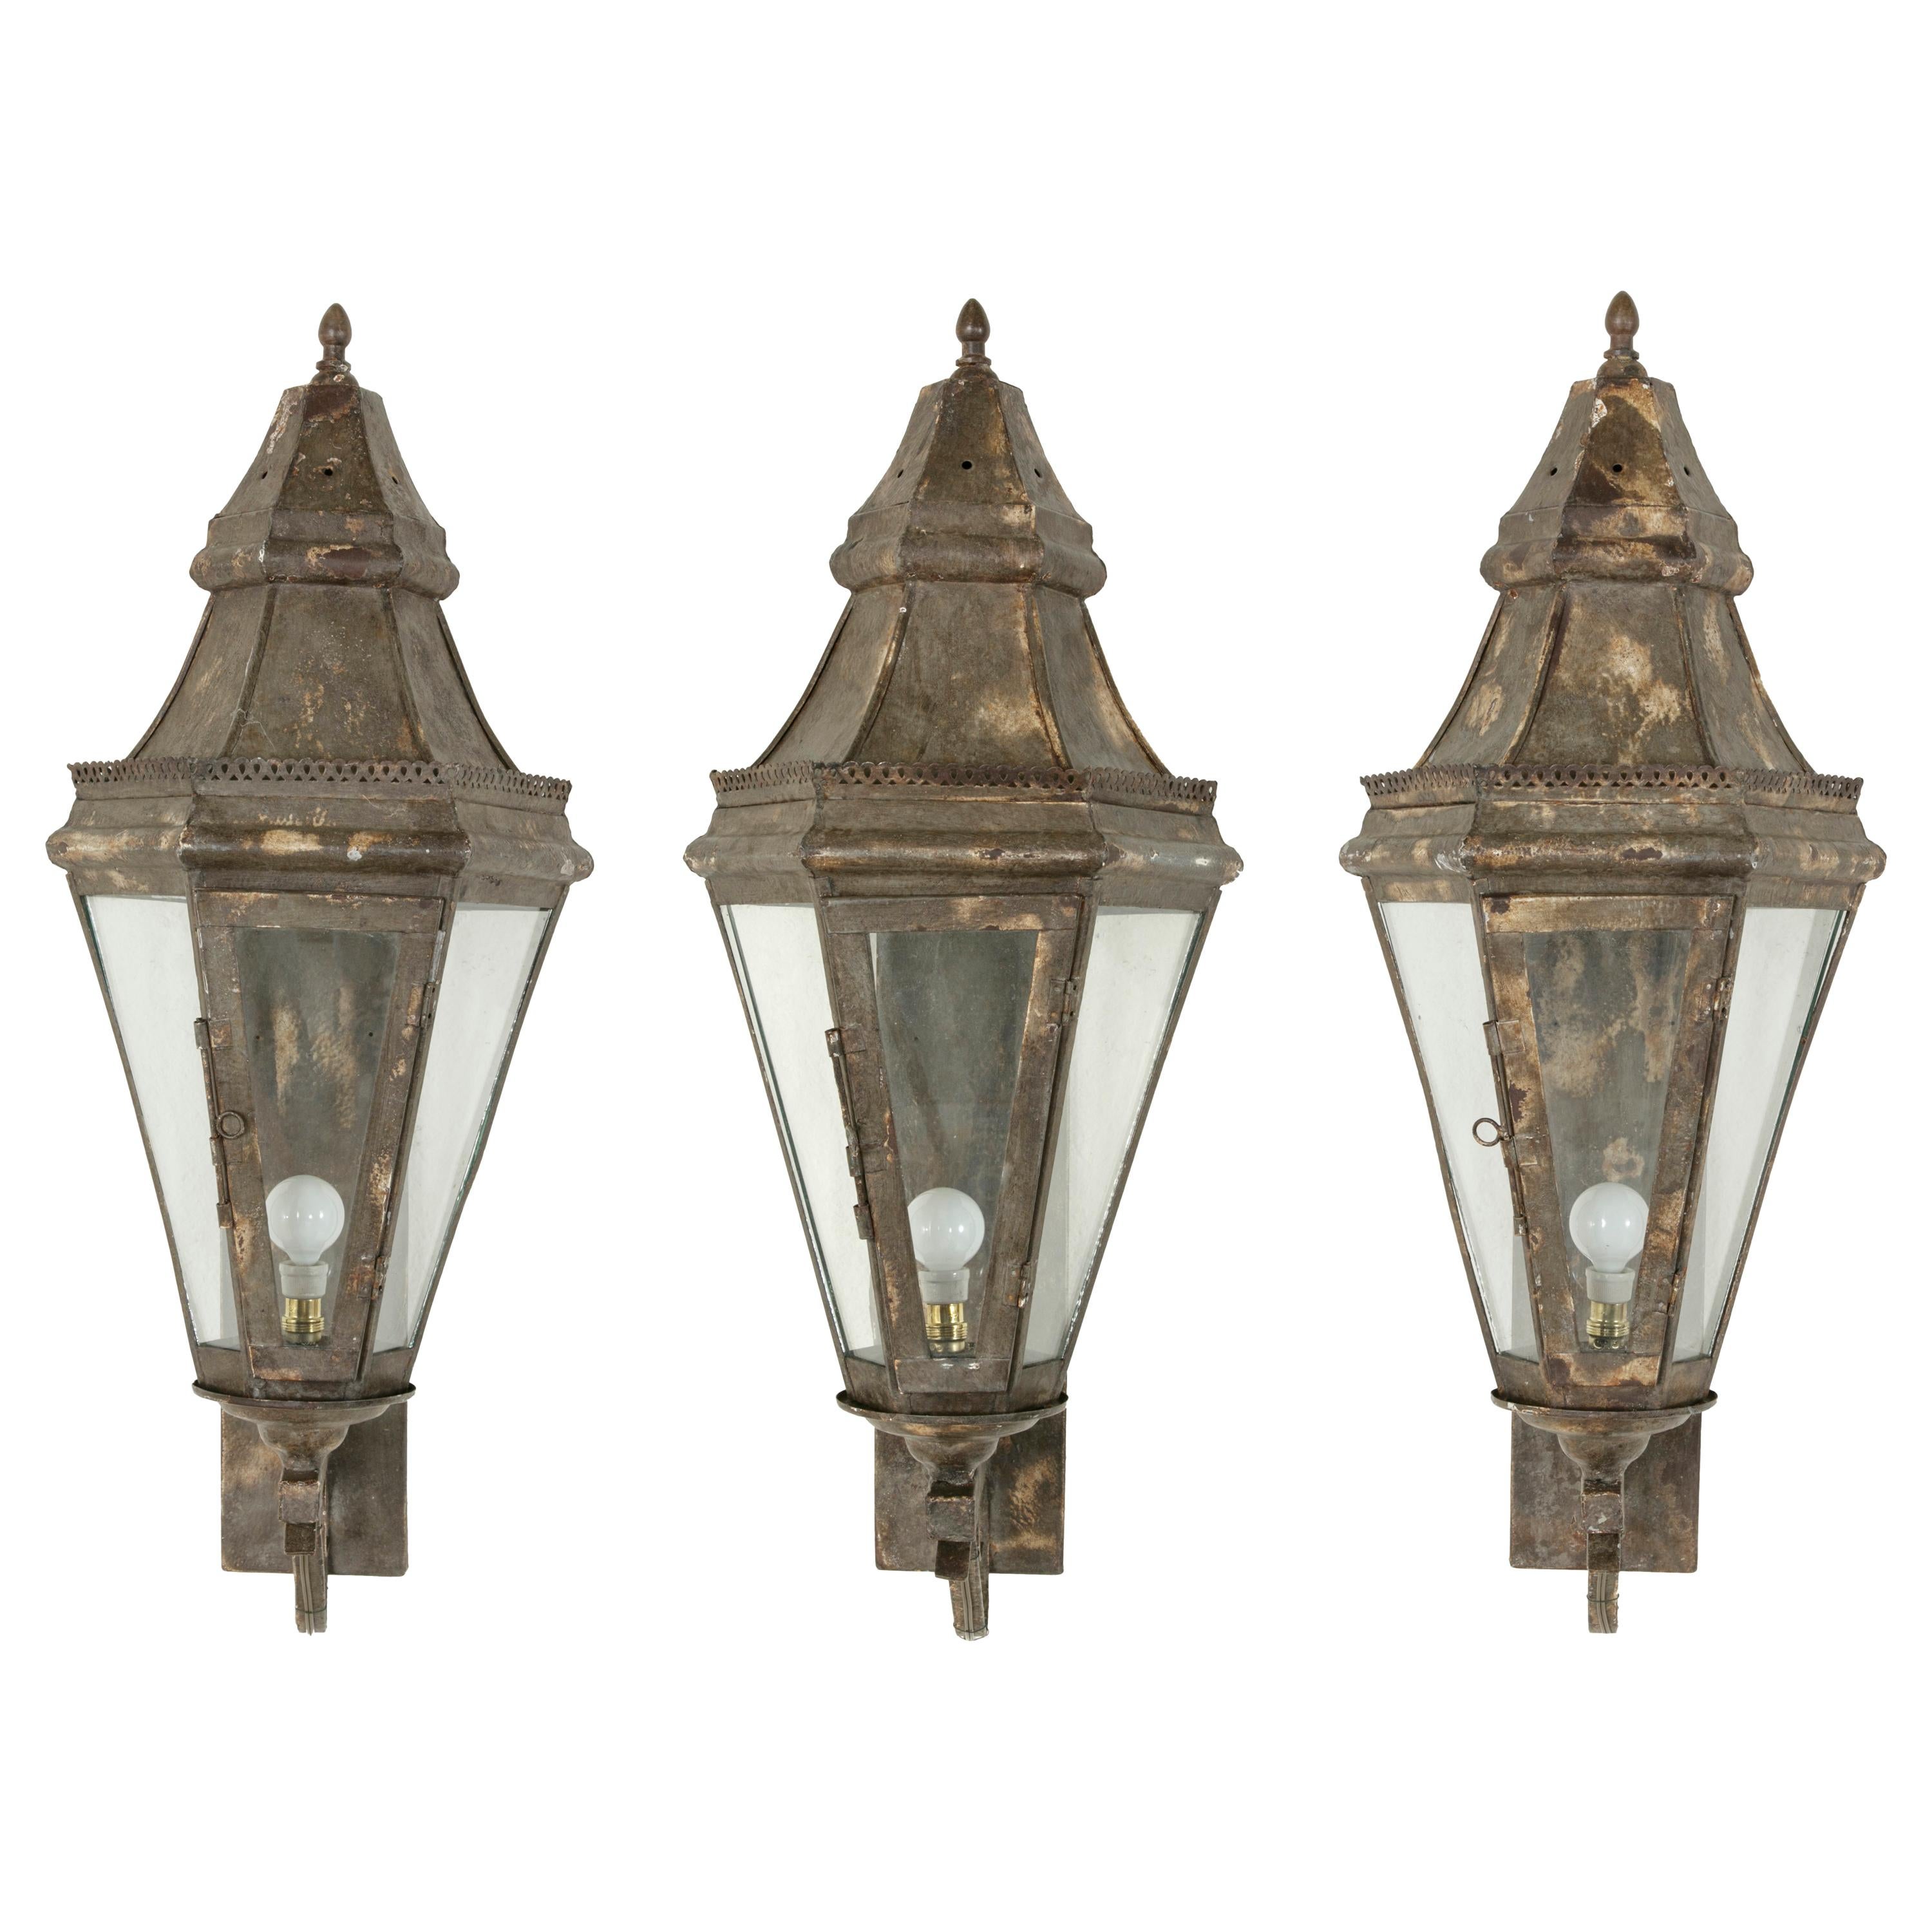 Early 20th Century French Wall Mounted Metal and Glass Venetian Lanterns